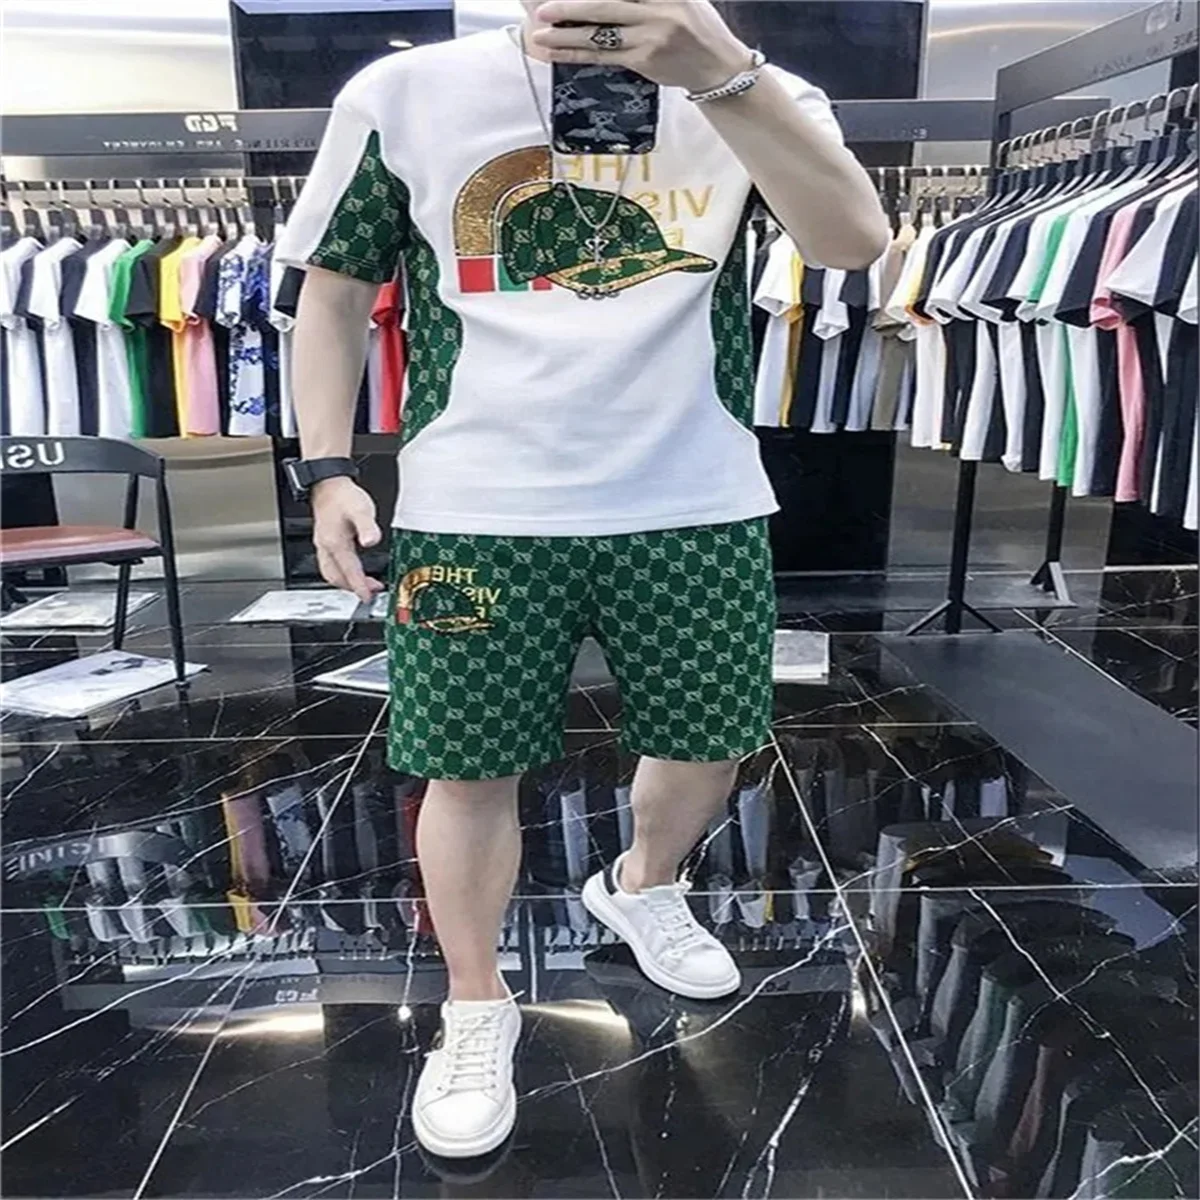 Summer Popular Men's T-Shirt+Shorts Suit Women Sports Suit Brand Printing Casual Fashion Quick Drying Short-sleeved T-shirt Set hub style summer new men s short sleeved quick drying sports top 3d printing fashion casual sun polo shirt s 3xl